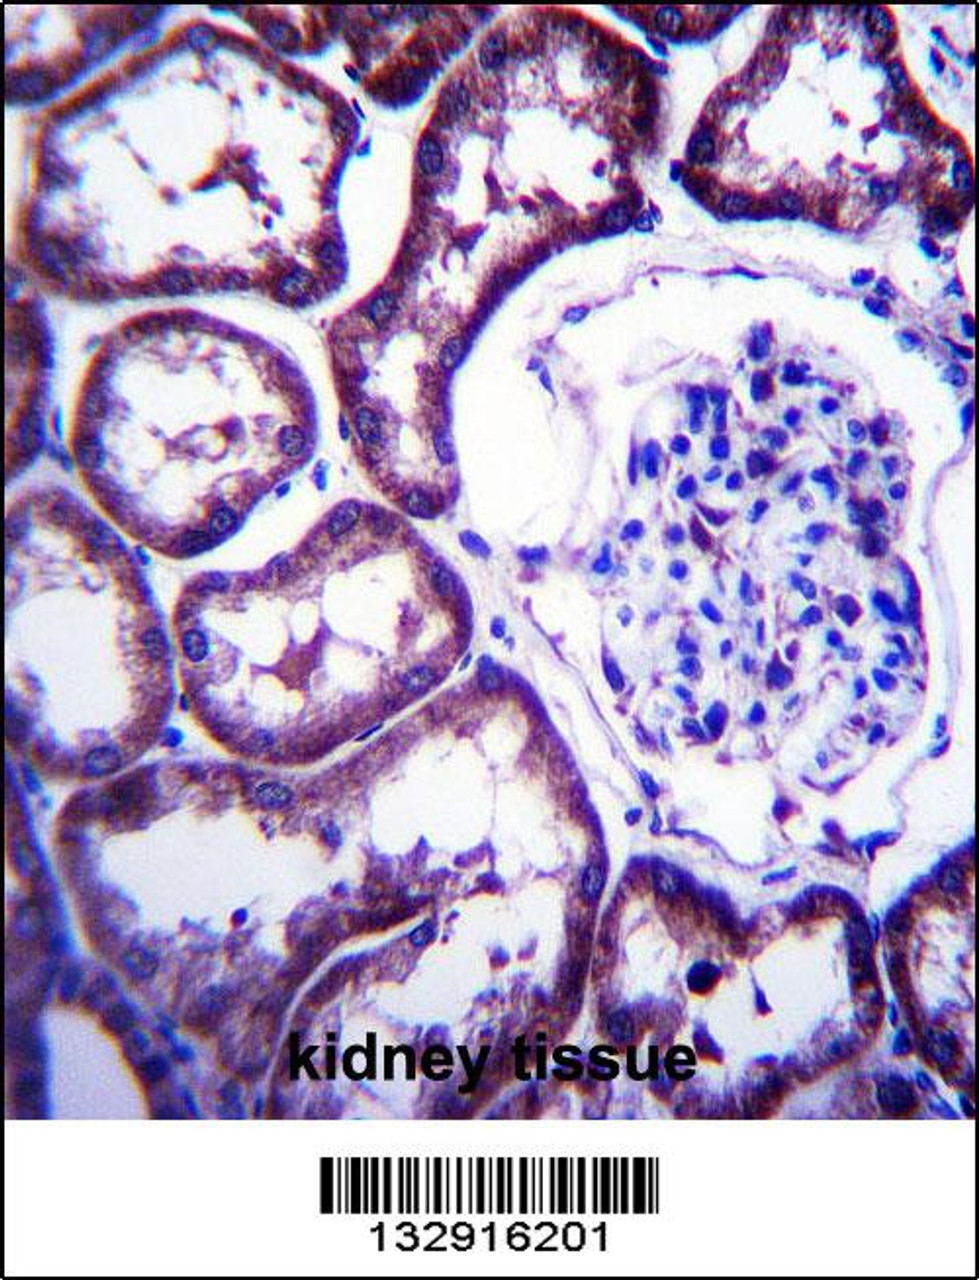 TXNDC15 Antibody immunohistochemistry analysis in formalin fixed and paraffin embedded human kidney tissue followed by peroxidase conjugation of the secondary antibody and DAB staining.